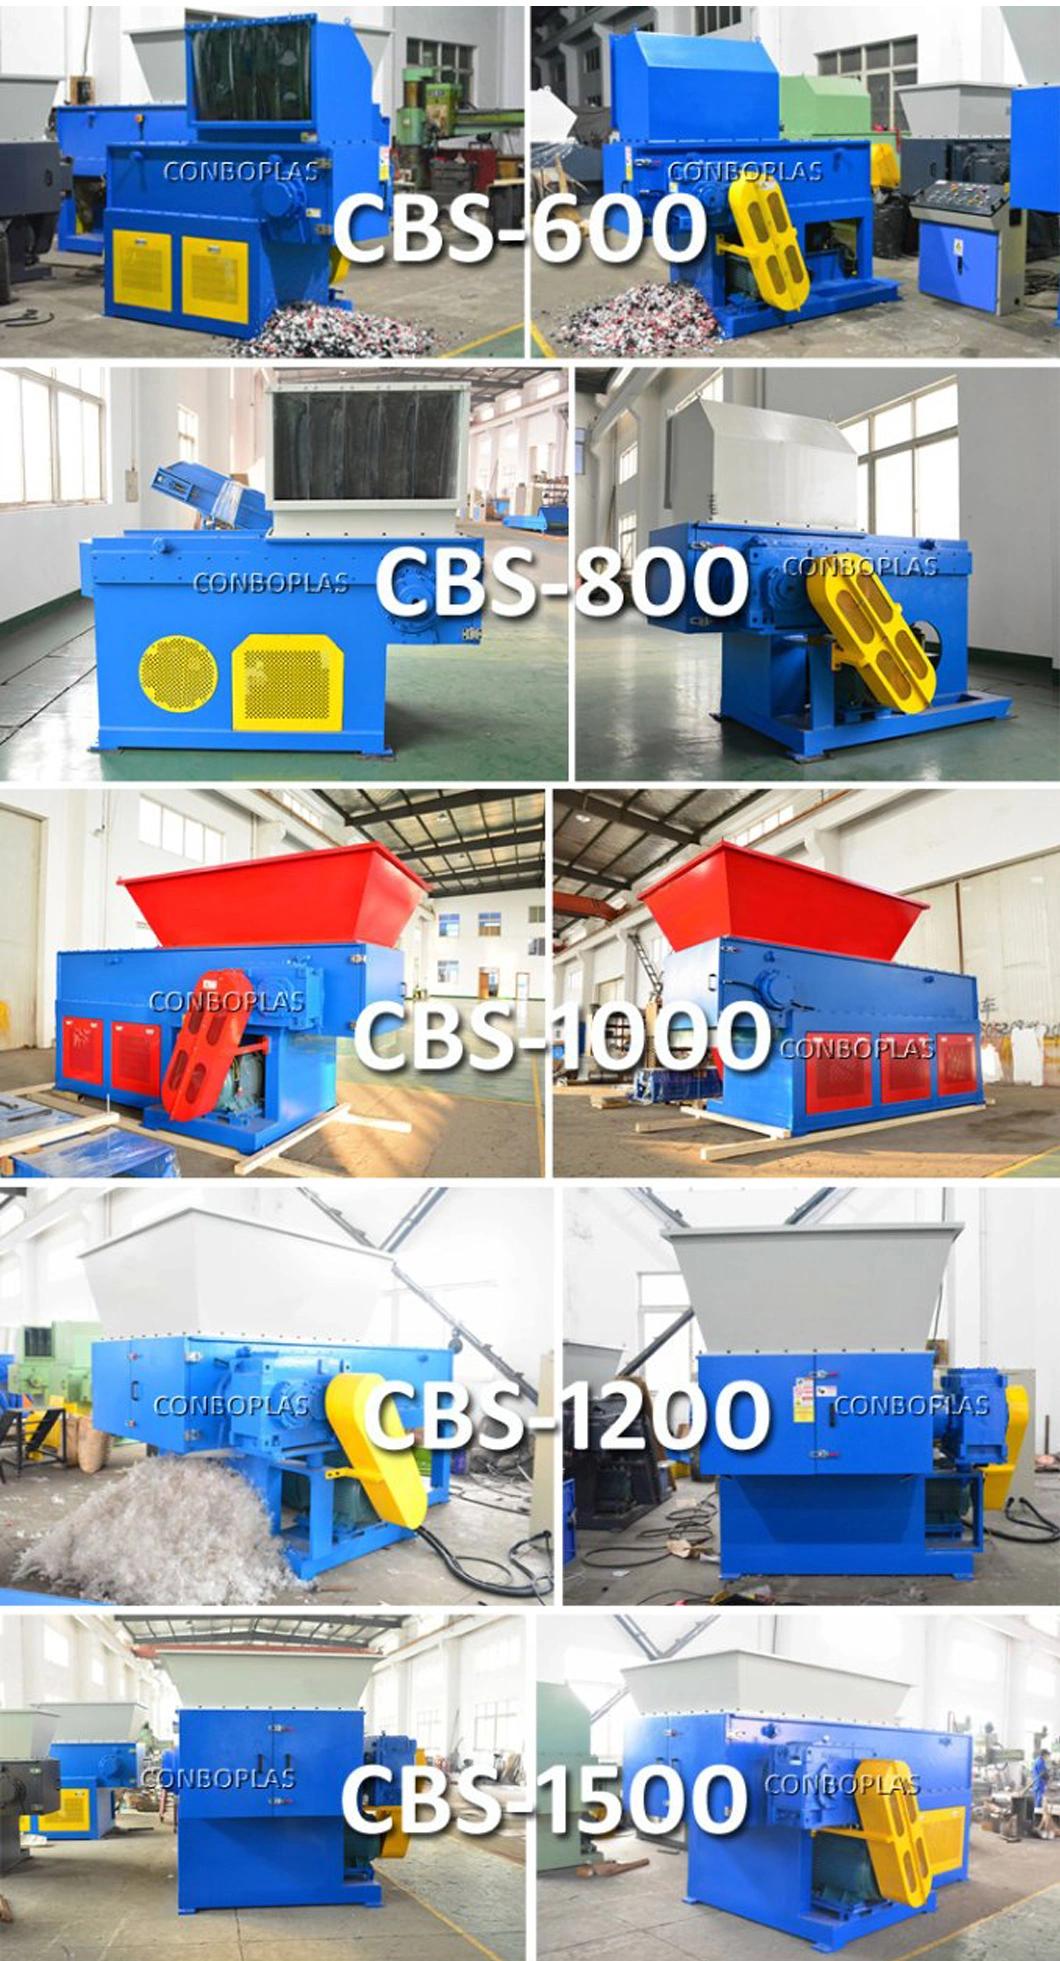 Single Shaft Shredder and Crusher System for Plastic Wastes